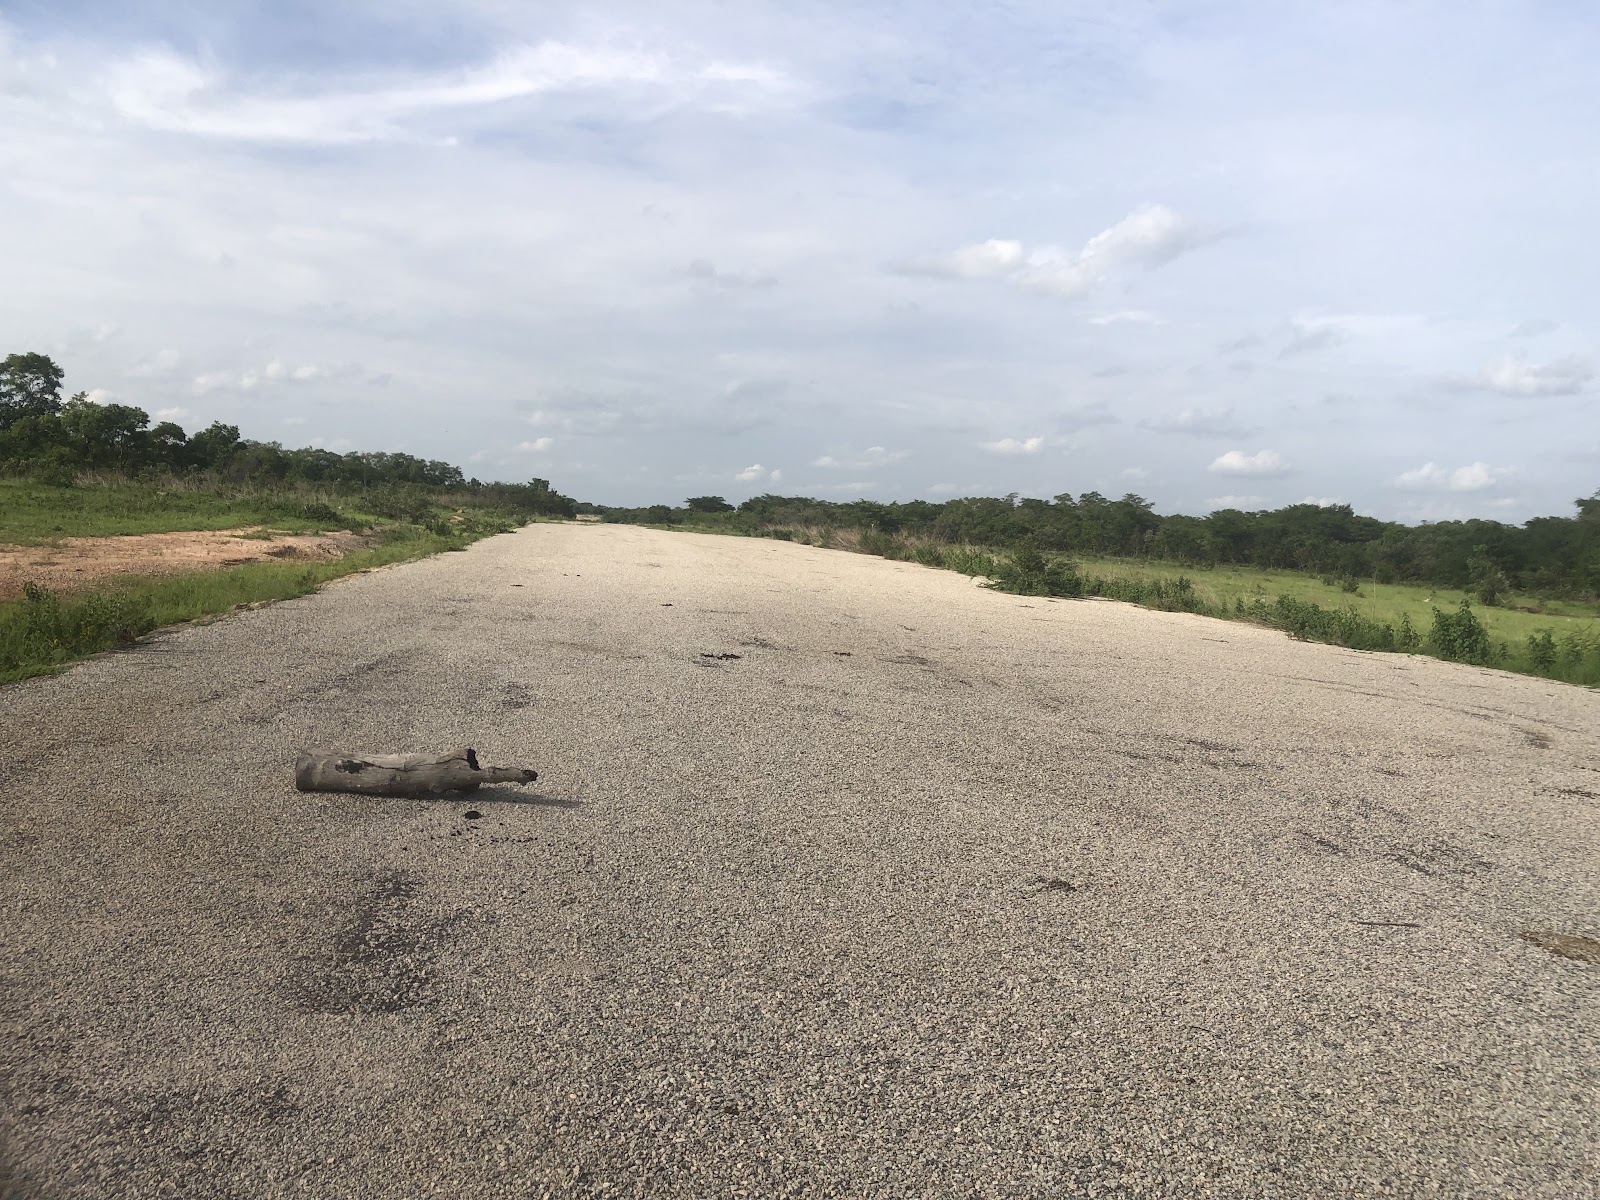 The airstrip filled with gravel / Yakubu Mohammed
